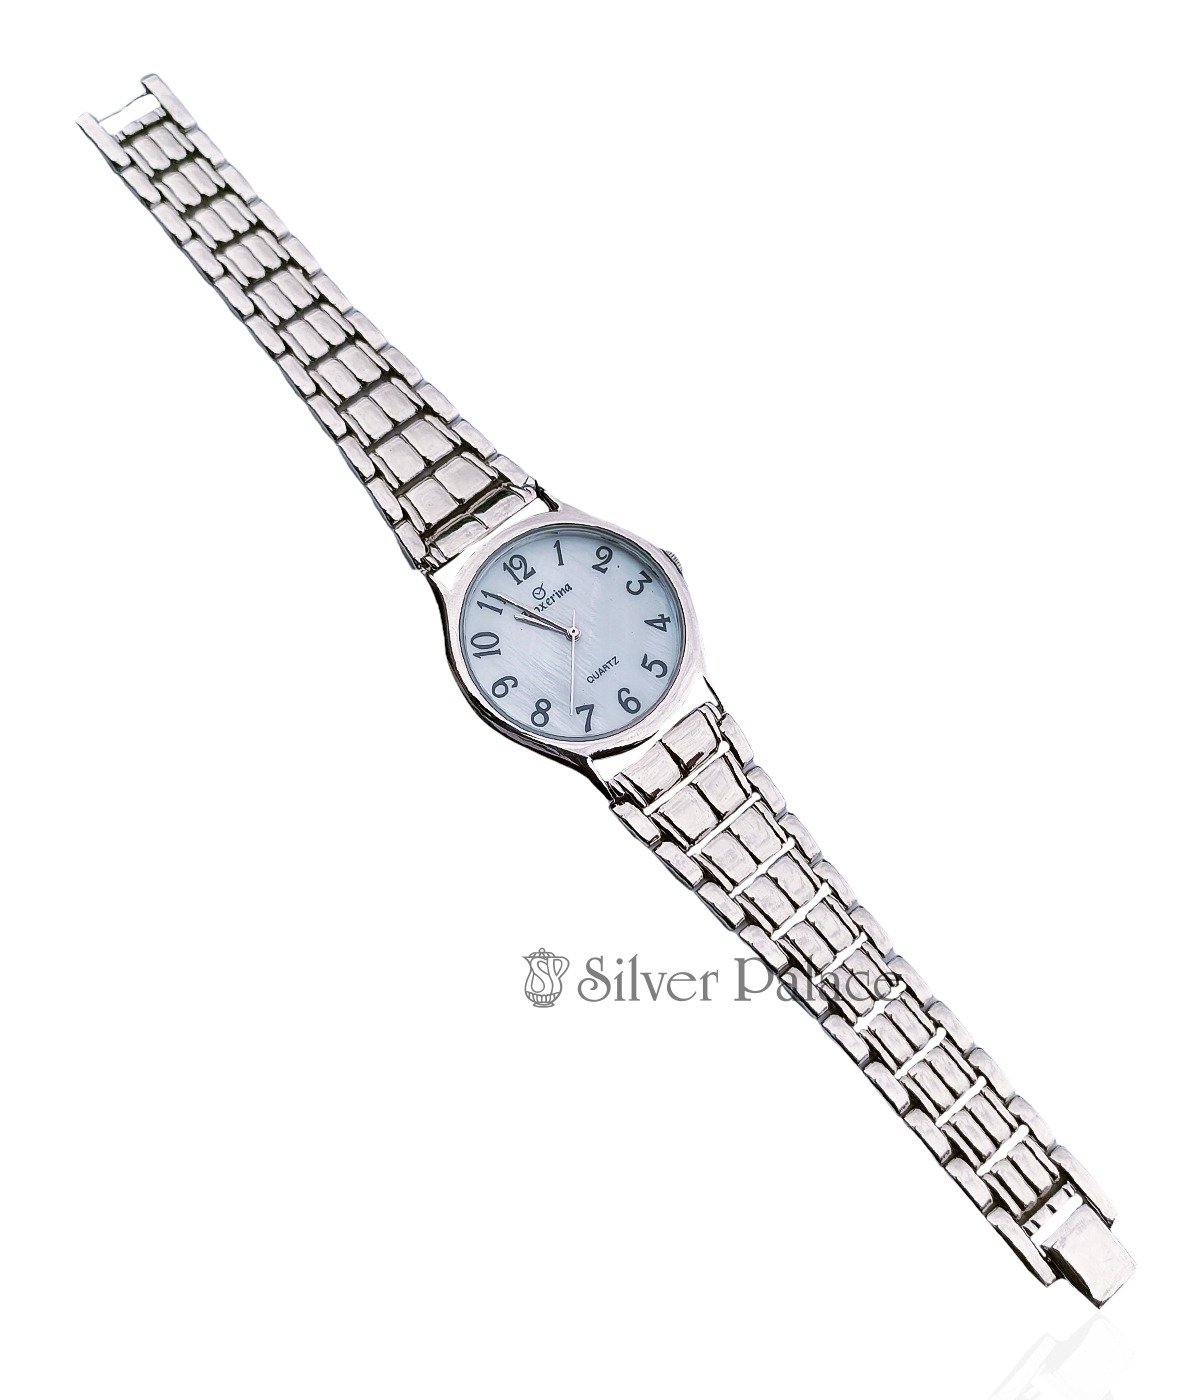 92.5 STERLING SILVER CIRCLE SHAPE DIAL UNISEX STYLISH WATCH